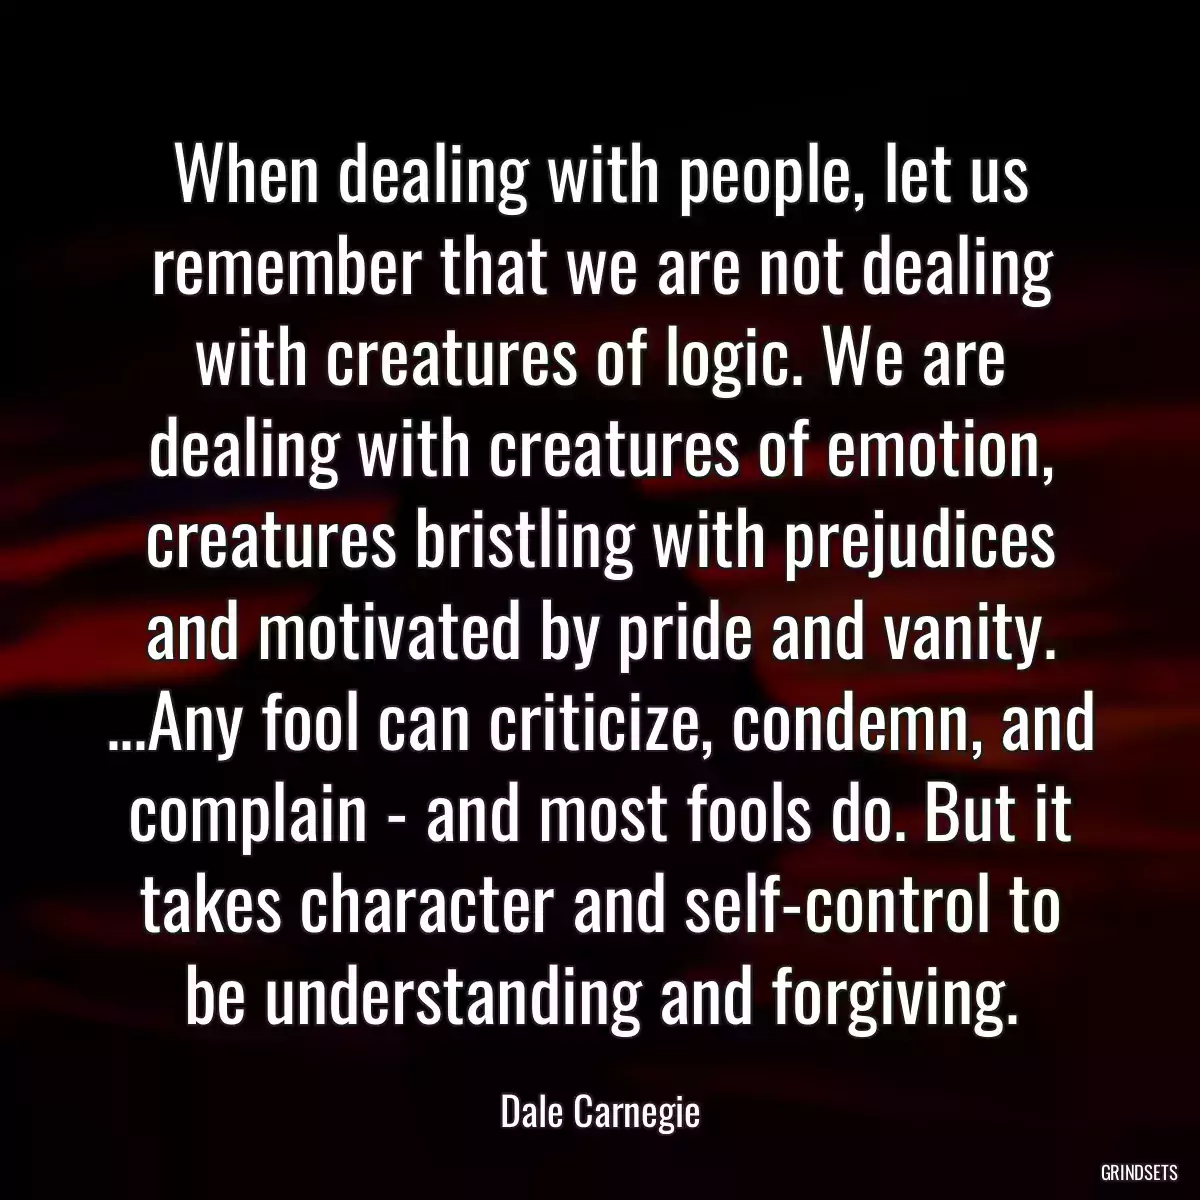 When dealing with people, let us remember that we are not dealing with creatures of logic. We are dealing with creatures of emotion, creatures bristling with prejudices and motivated by pride and vanity. ...Any fool can criticize, condemn, and complain - and most fools do. But it takes character and self-control to be understanding and forgiving.